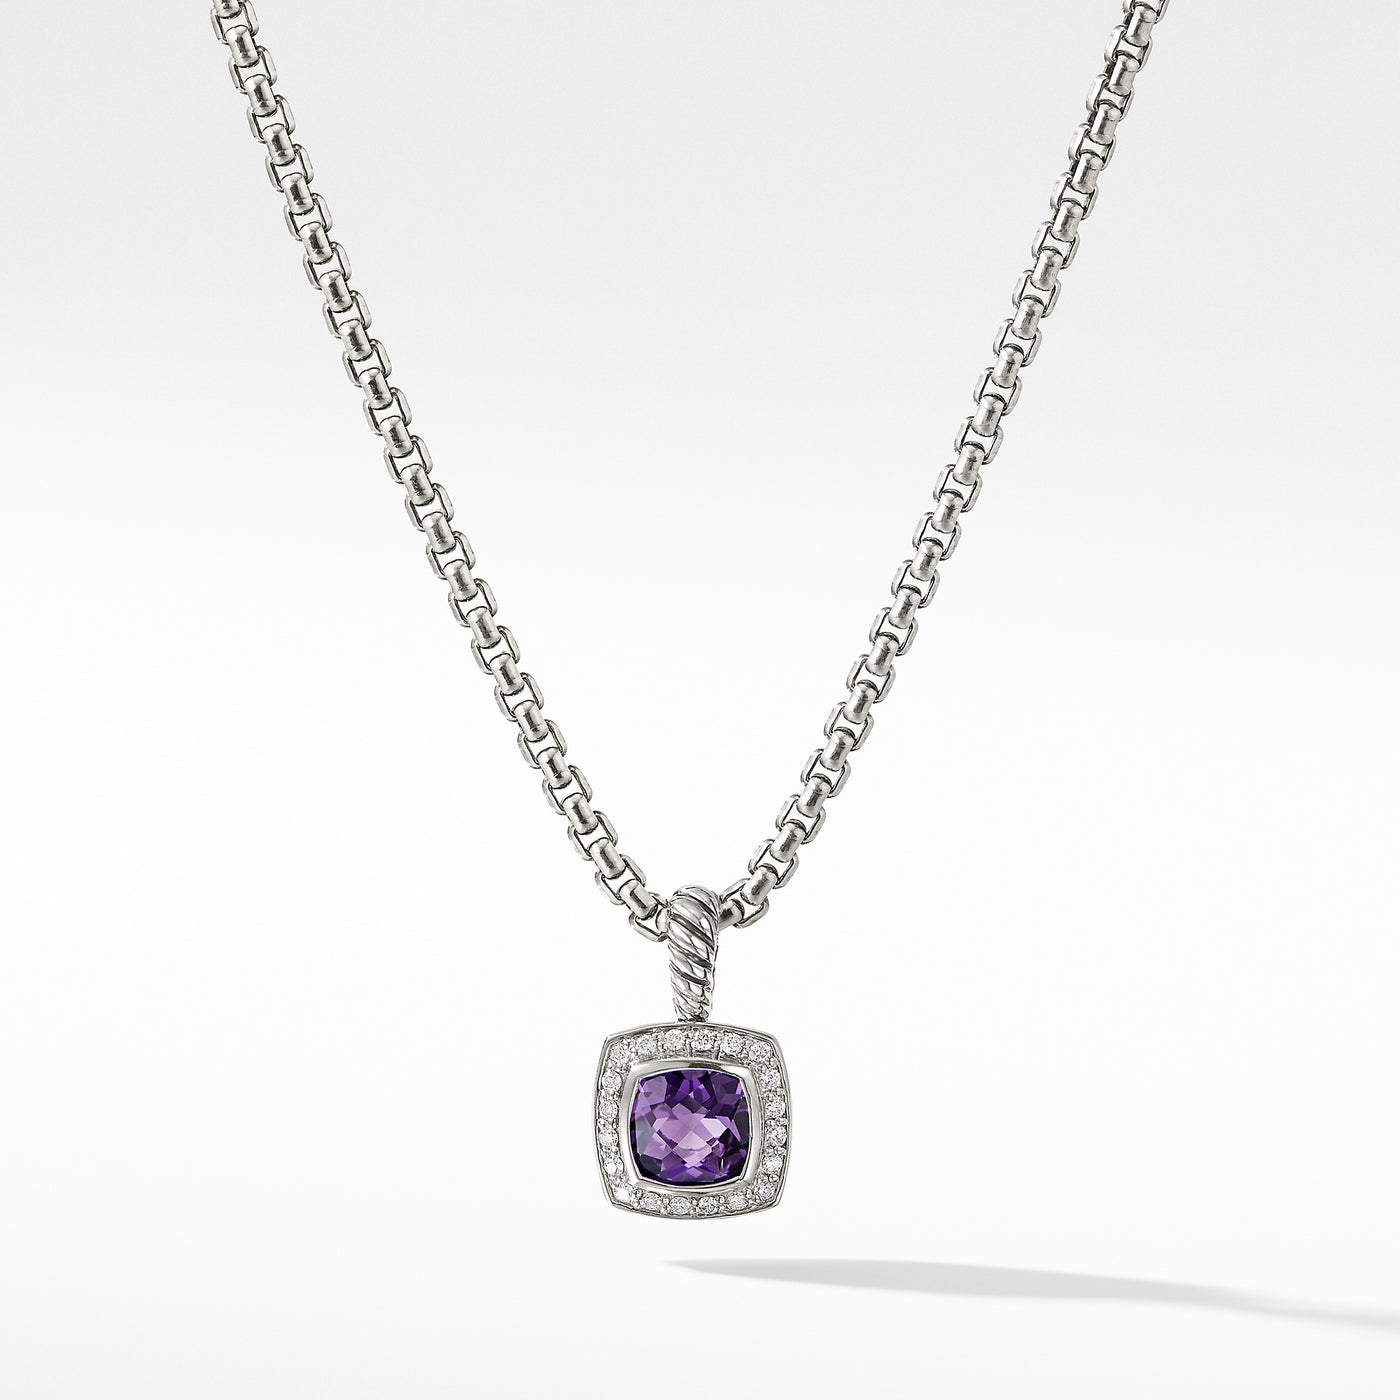 Petite Albion® Pendant Necklace in Sterling Silver with Amethyst and Diamonds\, 7mm